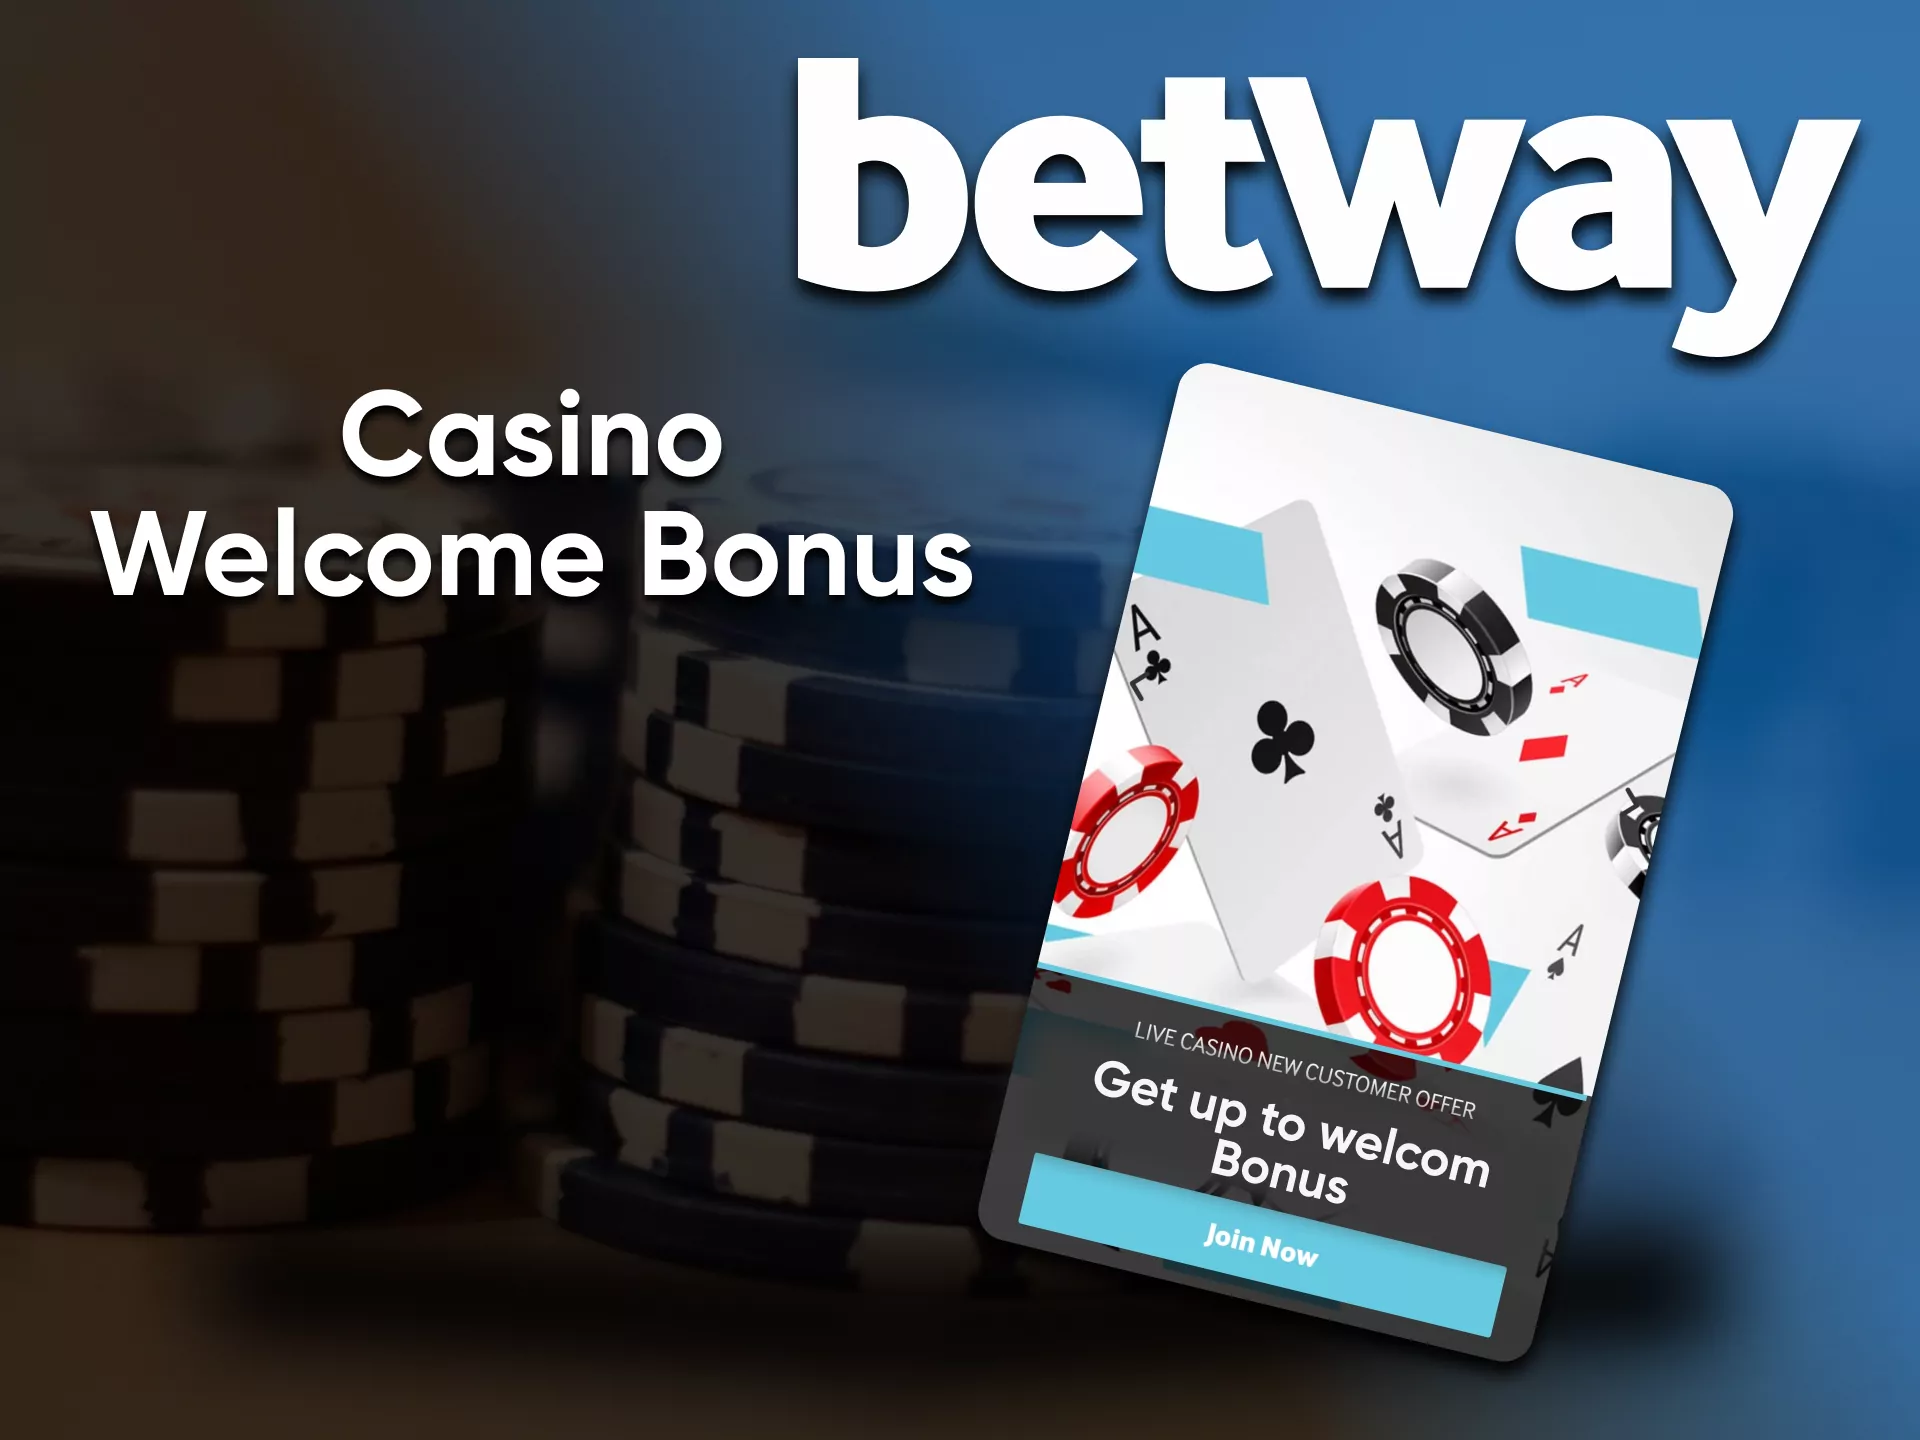 Make payment for getting a welcome bonus Betway.